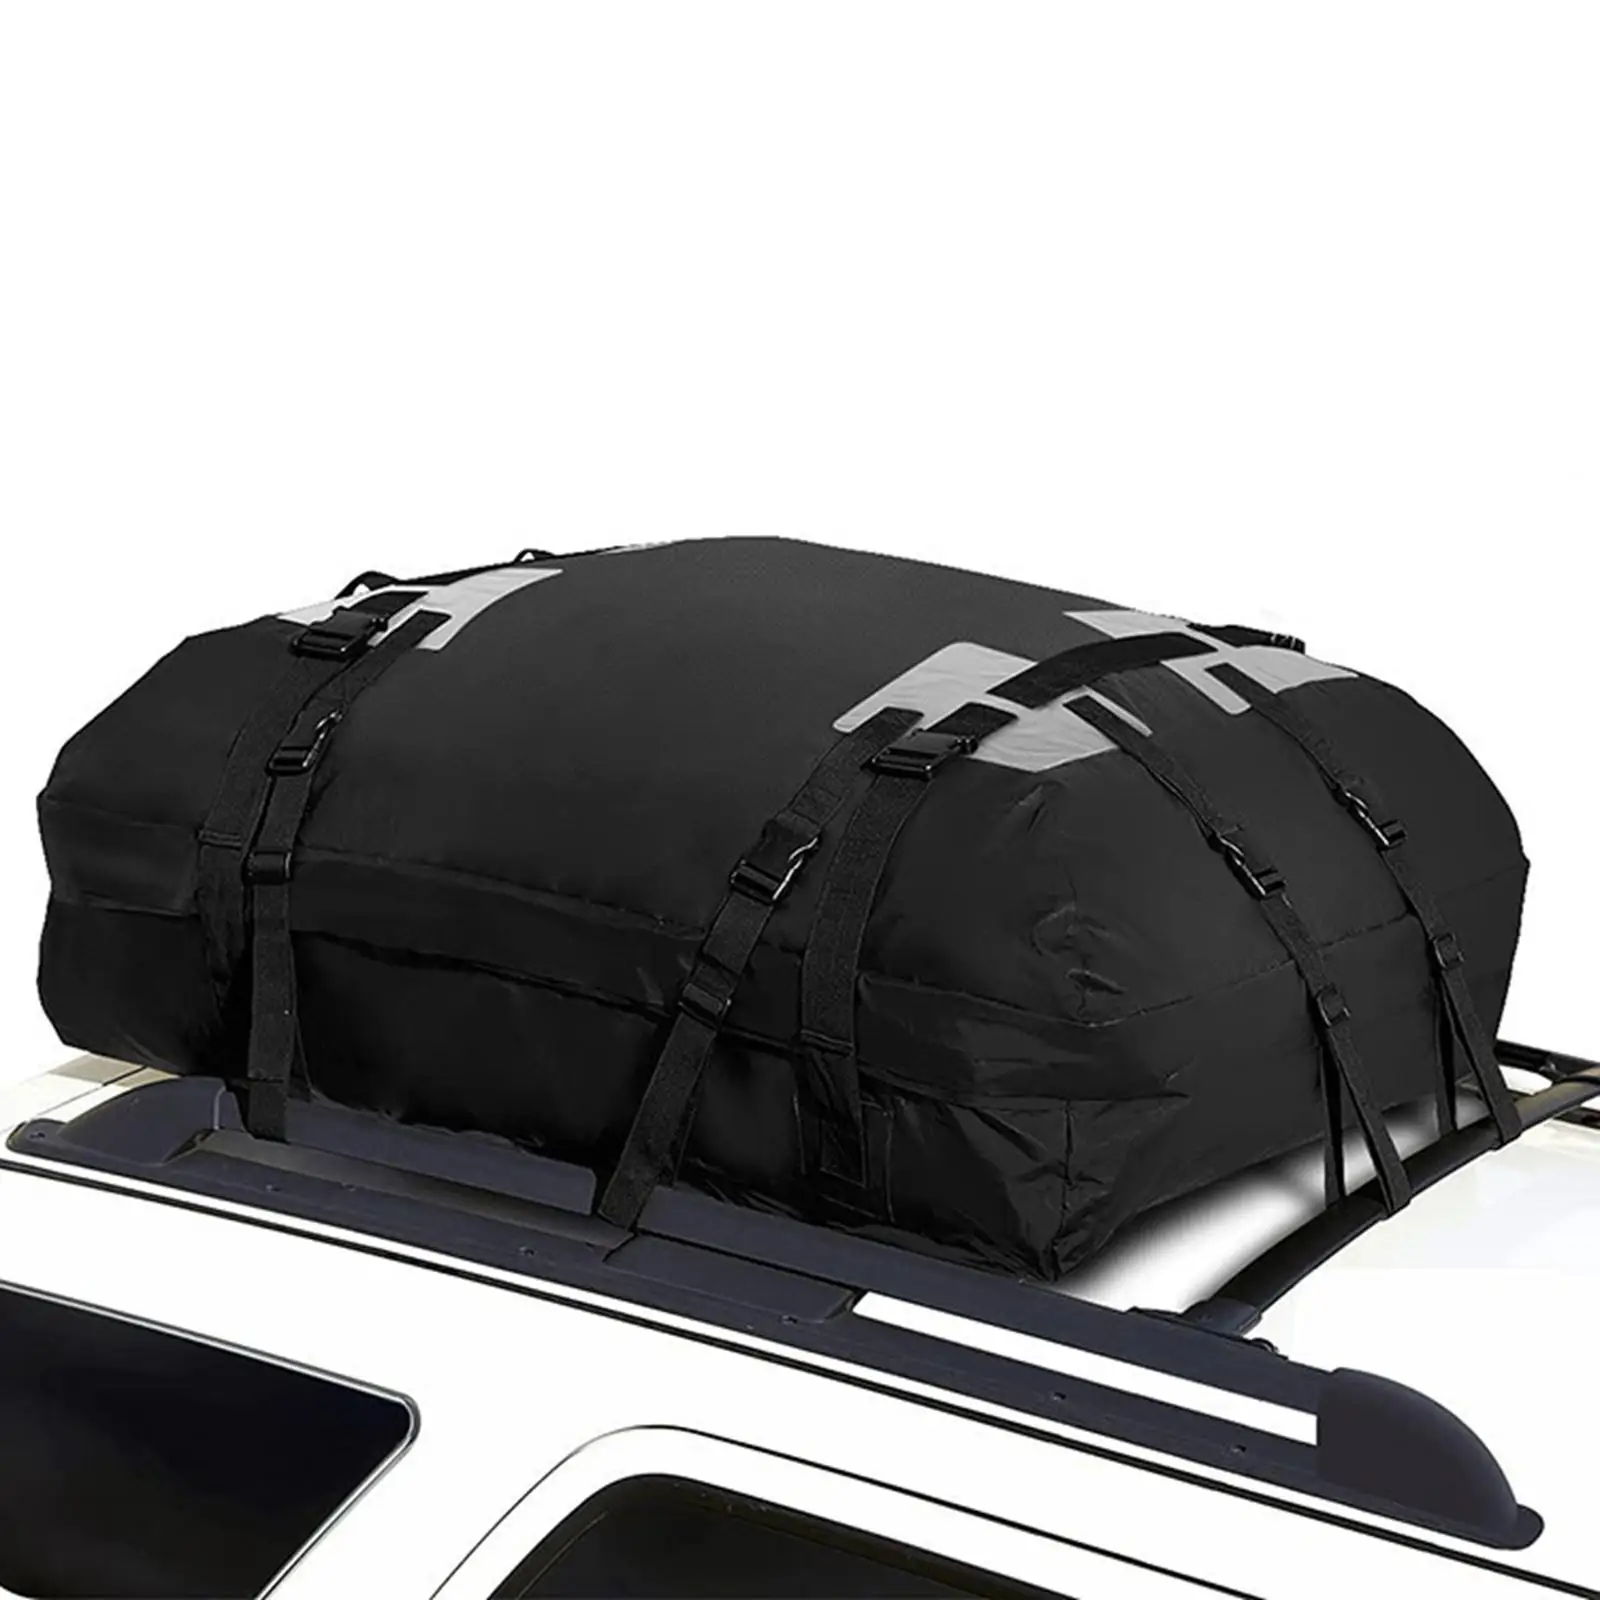 15 Cubic Feet Car Rooftop Bag, Car Roof Luggage Bag, Luggage Storage Waterproof Rooftop Carrier Bag, for Vehicles Cars SUV